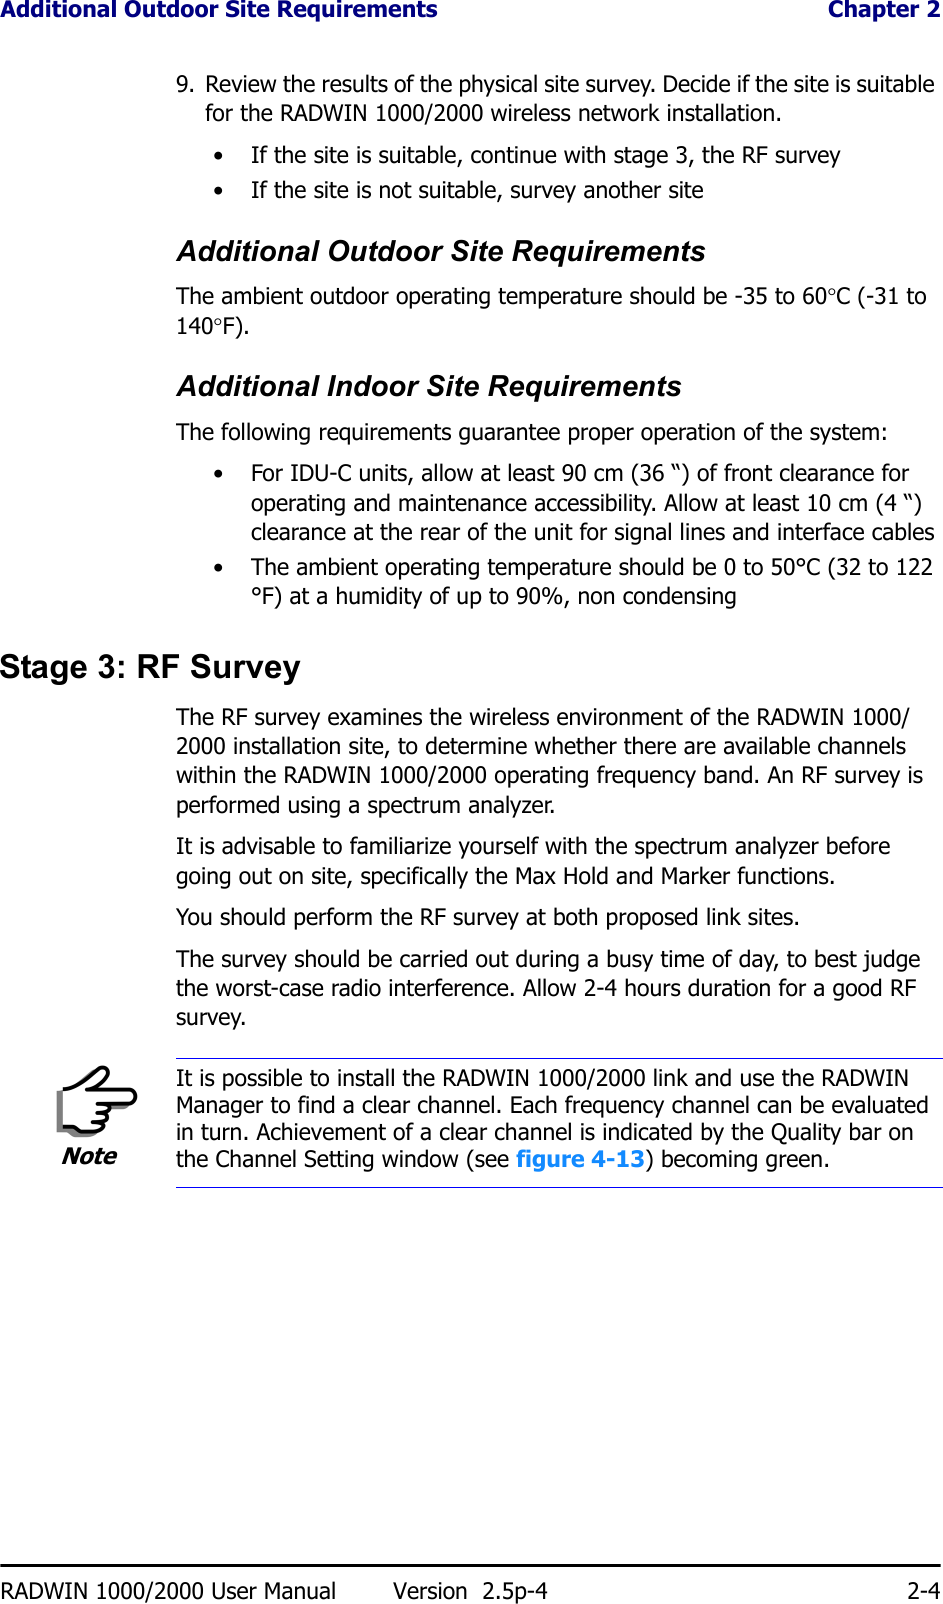 Additional Outdoor Site Requirements  Chapter 2RADWIN 1000/2000 User Manual Version  2.5p-4 2-49. Review the results of the physical site survey. Decide if the site is suitable for the RADWIN 1000/2000 wireless network installation.• If the site is suitable, continue with stage 3, the RF survey• If the site is not suitable, survey another siteAdditional Outdoor Site RequirementsThe ambient outdoor operating temperature should be -35 to 60°C (-31 to 140°F).Additional Indoor Site RequirementsThe following requirements guarantee proper operation of the system:• For IDU-C units, allow at least 90 cm (36 “) of front clearance for operating and maintenance accessibility. Allow at least 10 cm (4 “) clearance at the rear of the unit for signal lines and interface cables• The ambient operating temperature should be 0 to 50°C (32 to 122 °F) at a humidity of up to 90%, non condensingStage 3: RF SurveyThe RF survey examines the wireless environment of the RADWIN 1000/2000 installation site, to determine whether there are available channels within the RADWIN 1000/2000 operating frequency band. An RF survey is performed using a spectrum analyzer.It is advisable to familiarize yourself with the spectrum analyzer before going out on site, specifically the Max Hold and Marker functions.You should perform the RF survey at both proposed link sites.The survey should be carried out during a busy time of day, to best judge the worst-case radio interference. Allow 2-4 hours duration for a good RF survey.NoteIt is possible to install the RADWIN 1000/2000 link and use the RADWIN Manager to find a clear channel. Each frequency channel can be evaluated in turn. Achievement of a clear channel is indicated by the Quality bar on the Channel Setting window (see figure 4-13) becoming green.